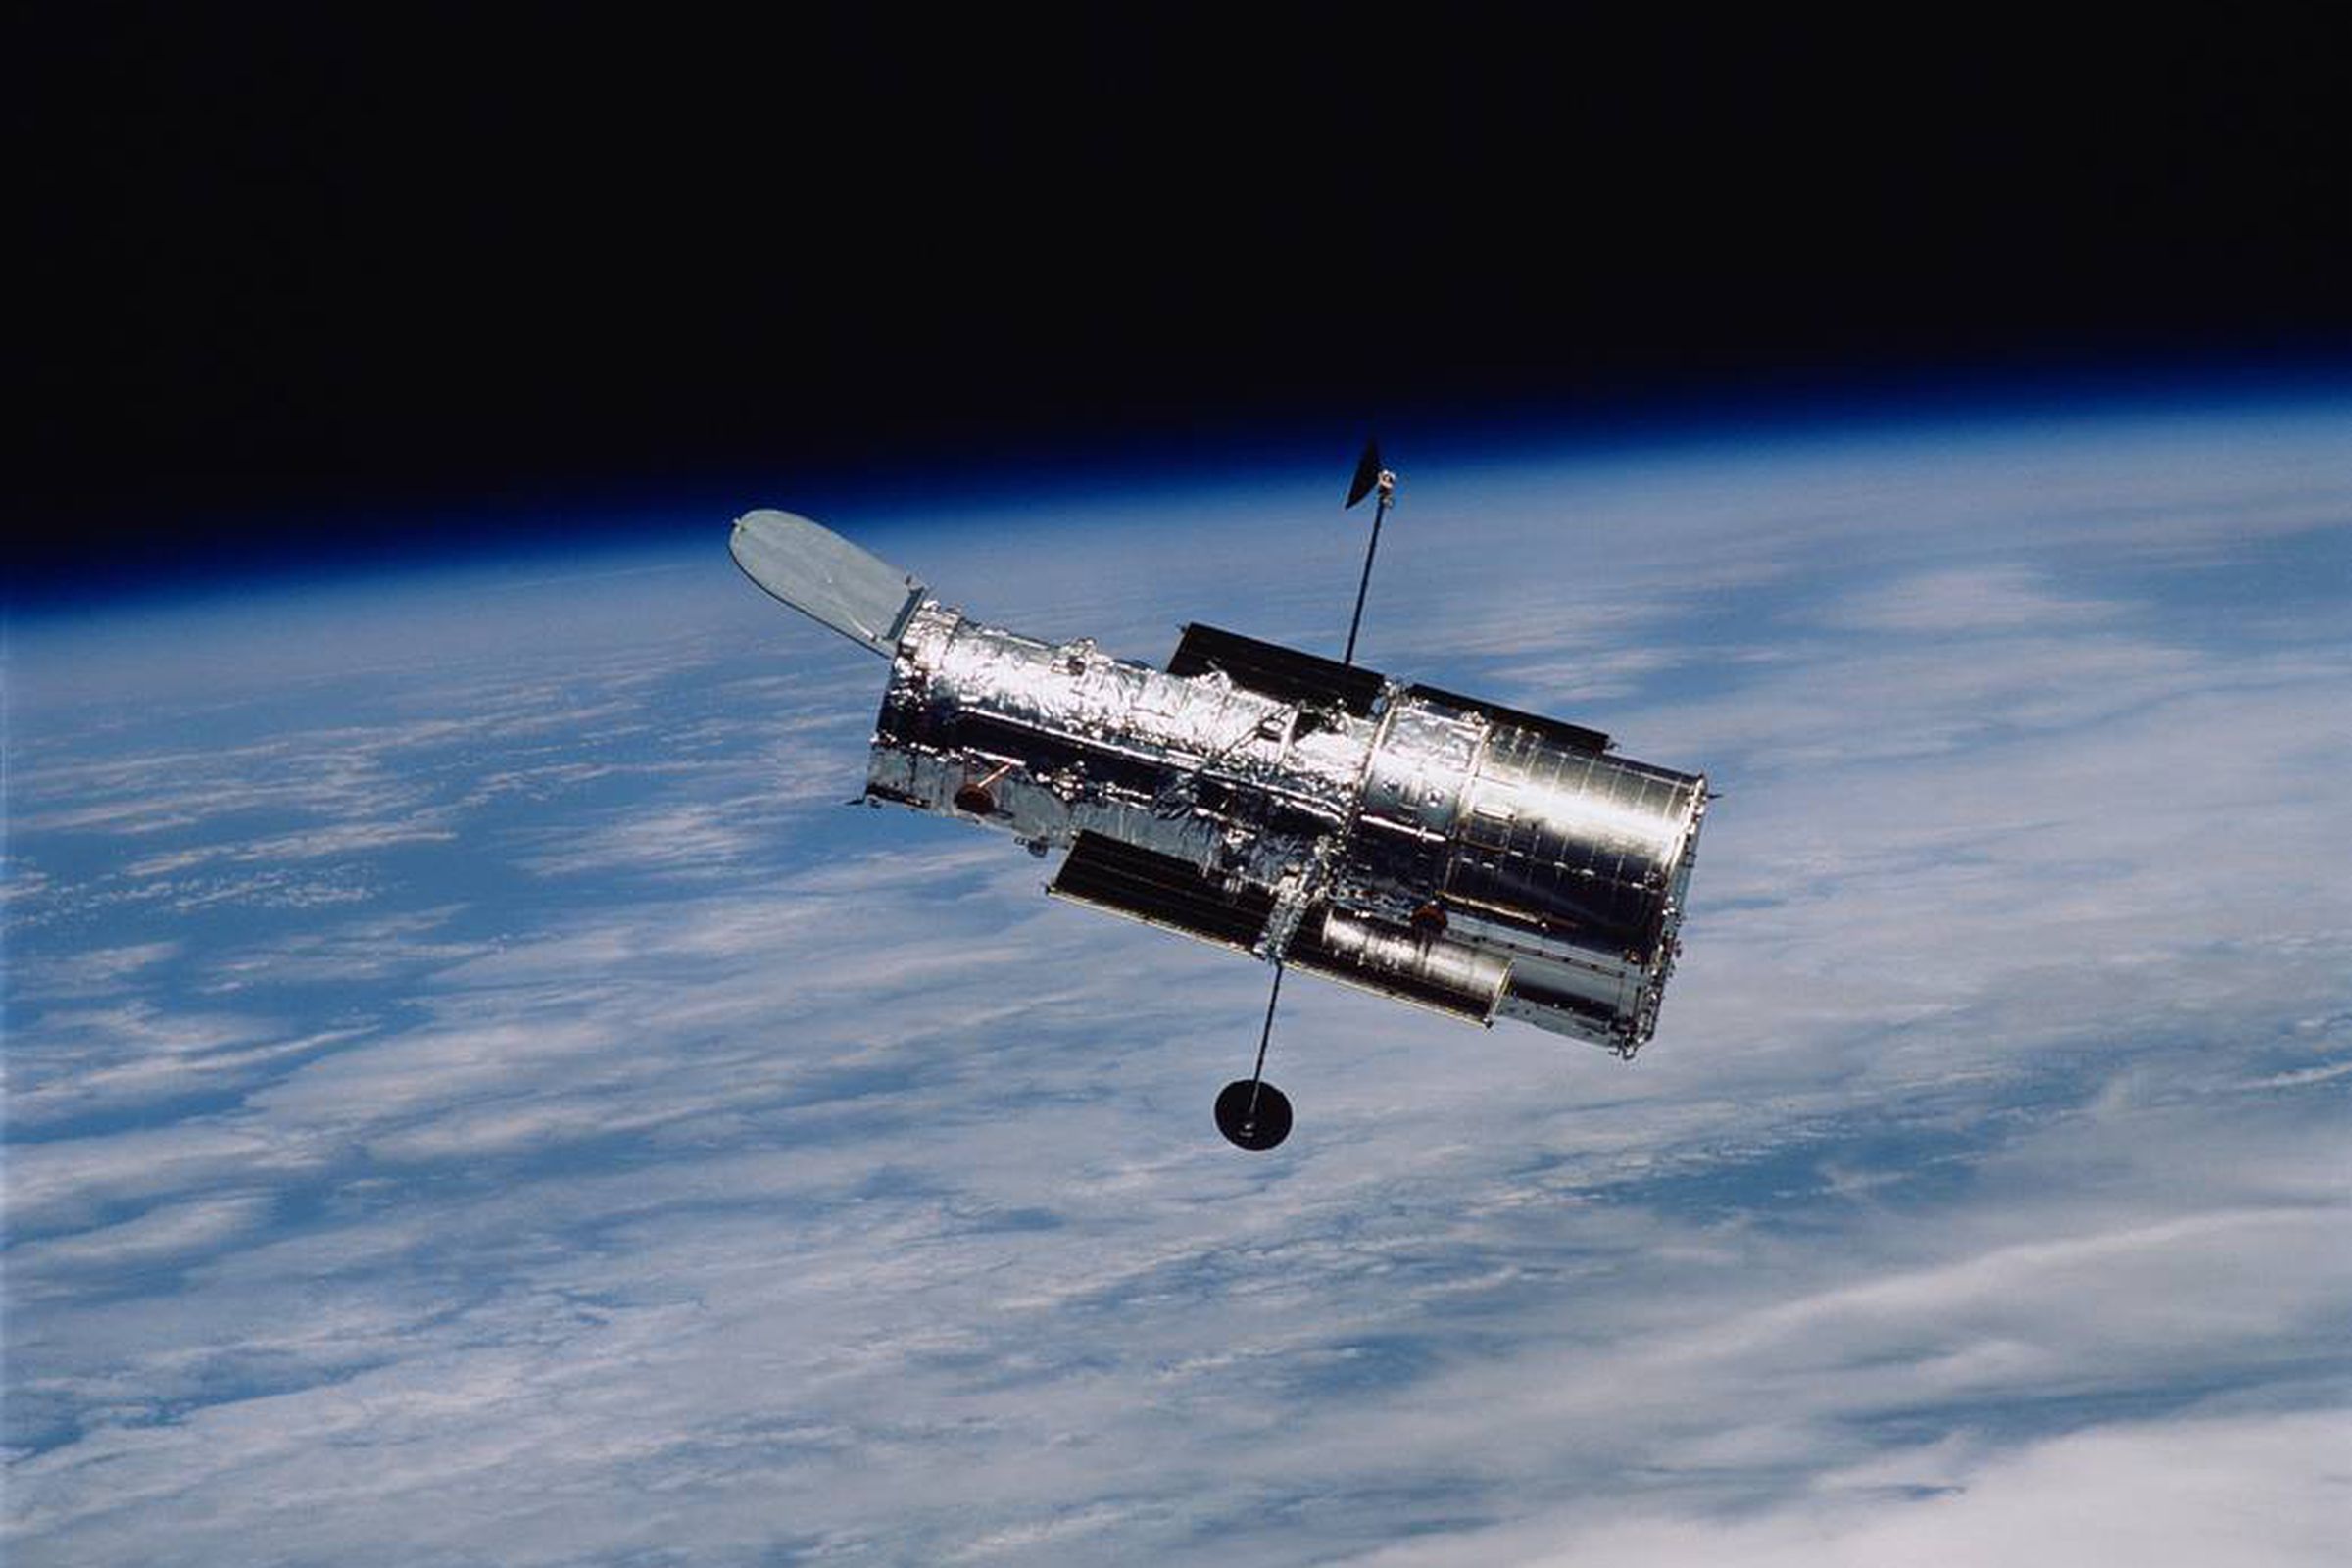 Hubble is in the foreground, the curve of the earth is in the background